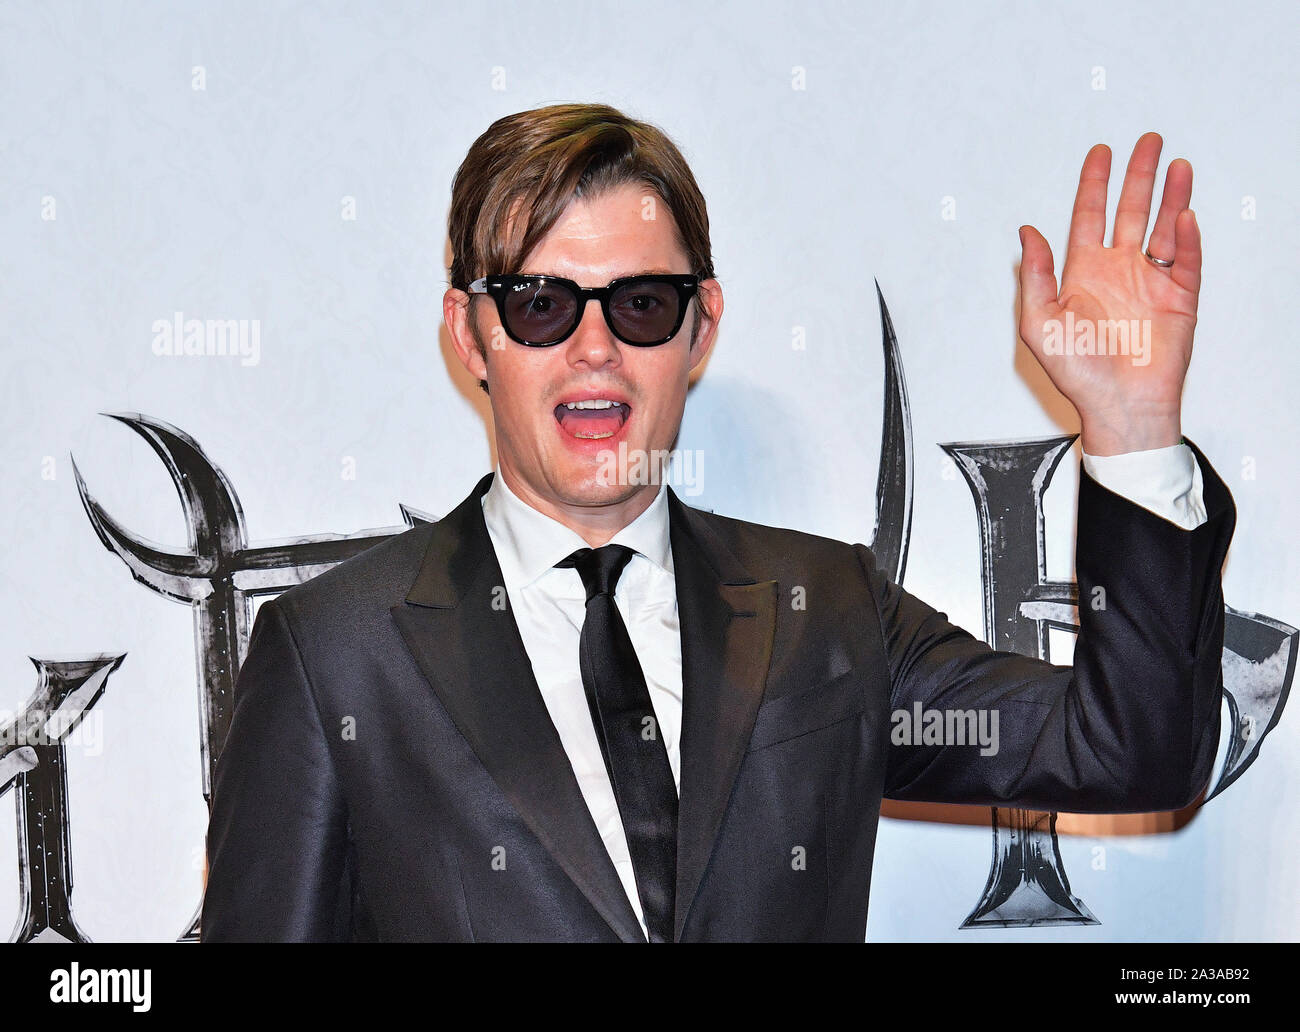 Actor Sam Riley attends the Japan premiere for 'Maleficent: Mistress of Evil' at Roppongi Hills Arena in Tokyo, Japan on October 3, 2019. Credit: AFLO/Alamy Live News Stock Photo